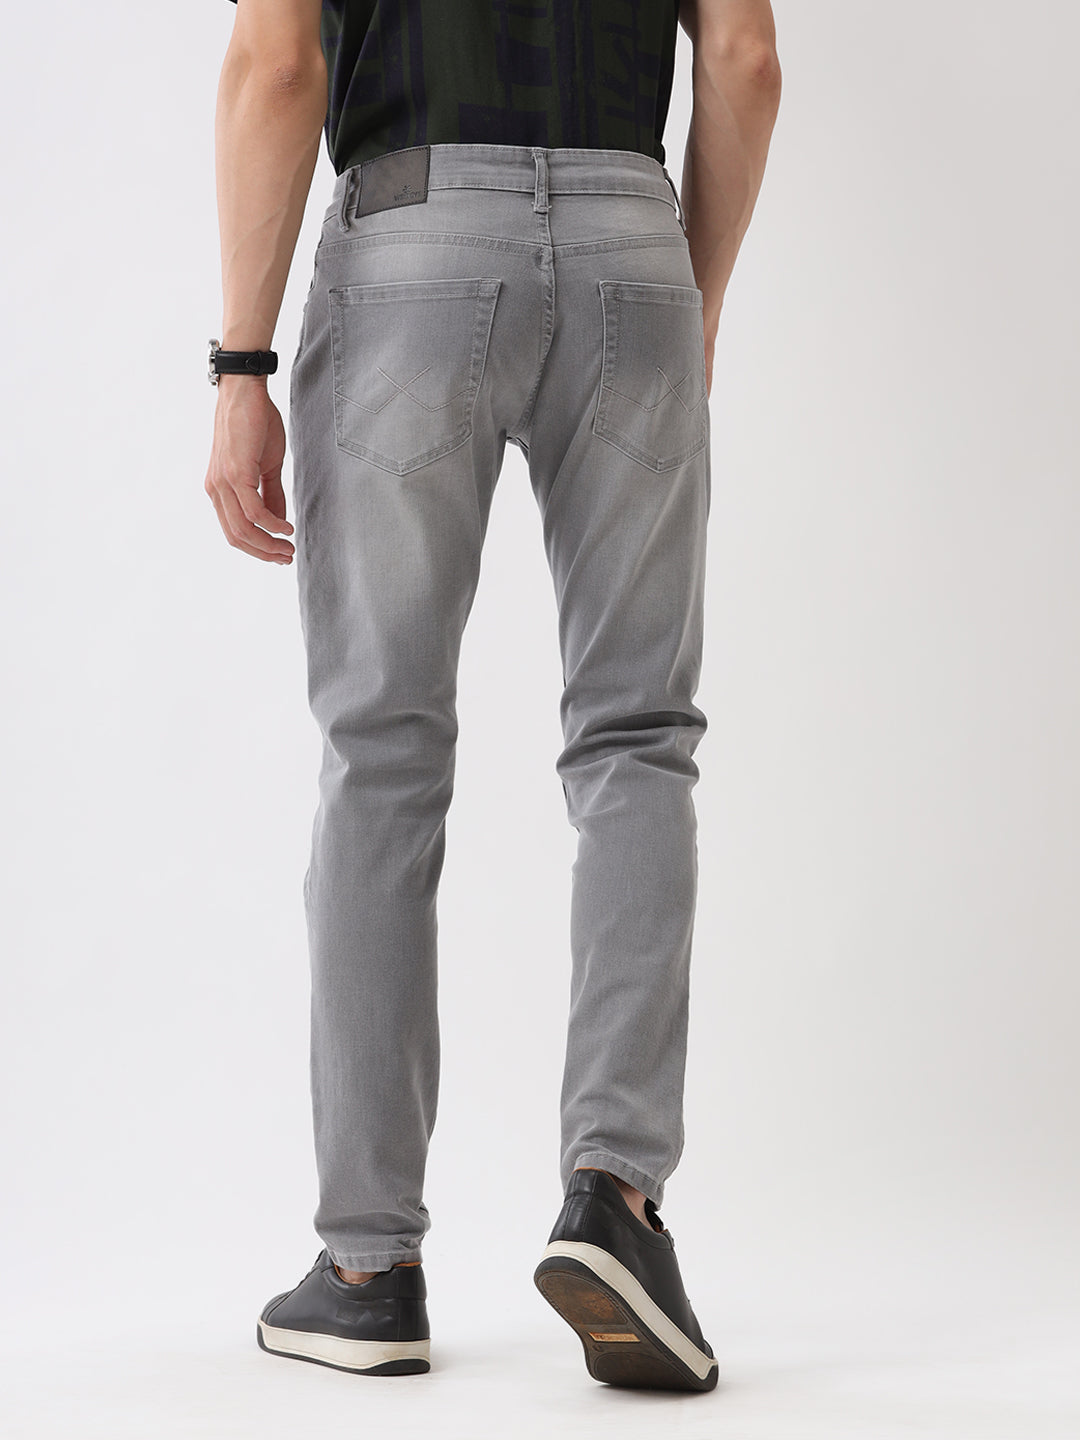 Grey Fade Slim Tapered Jeans